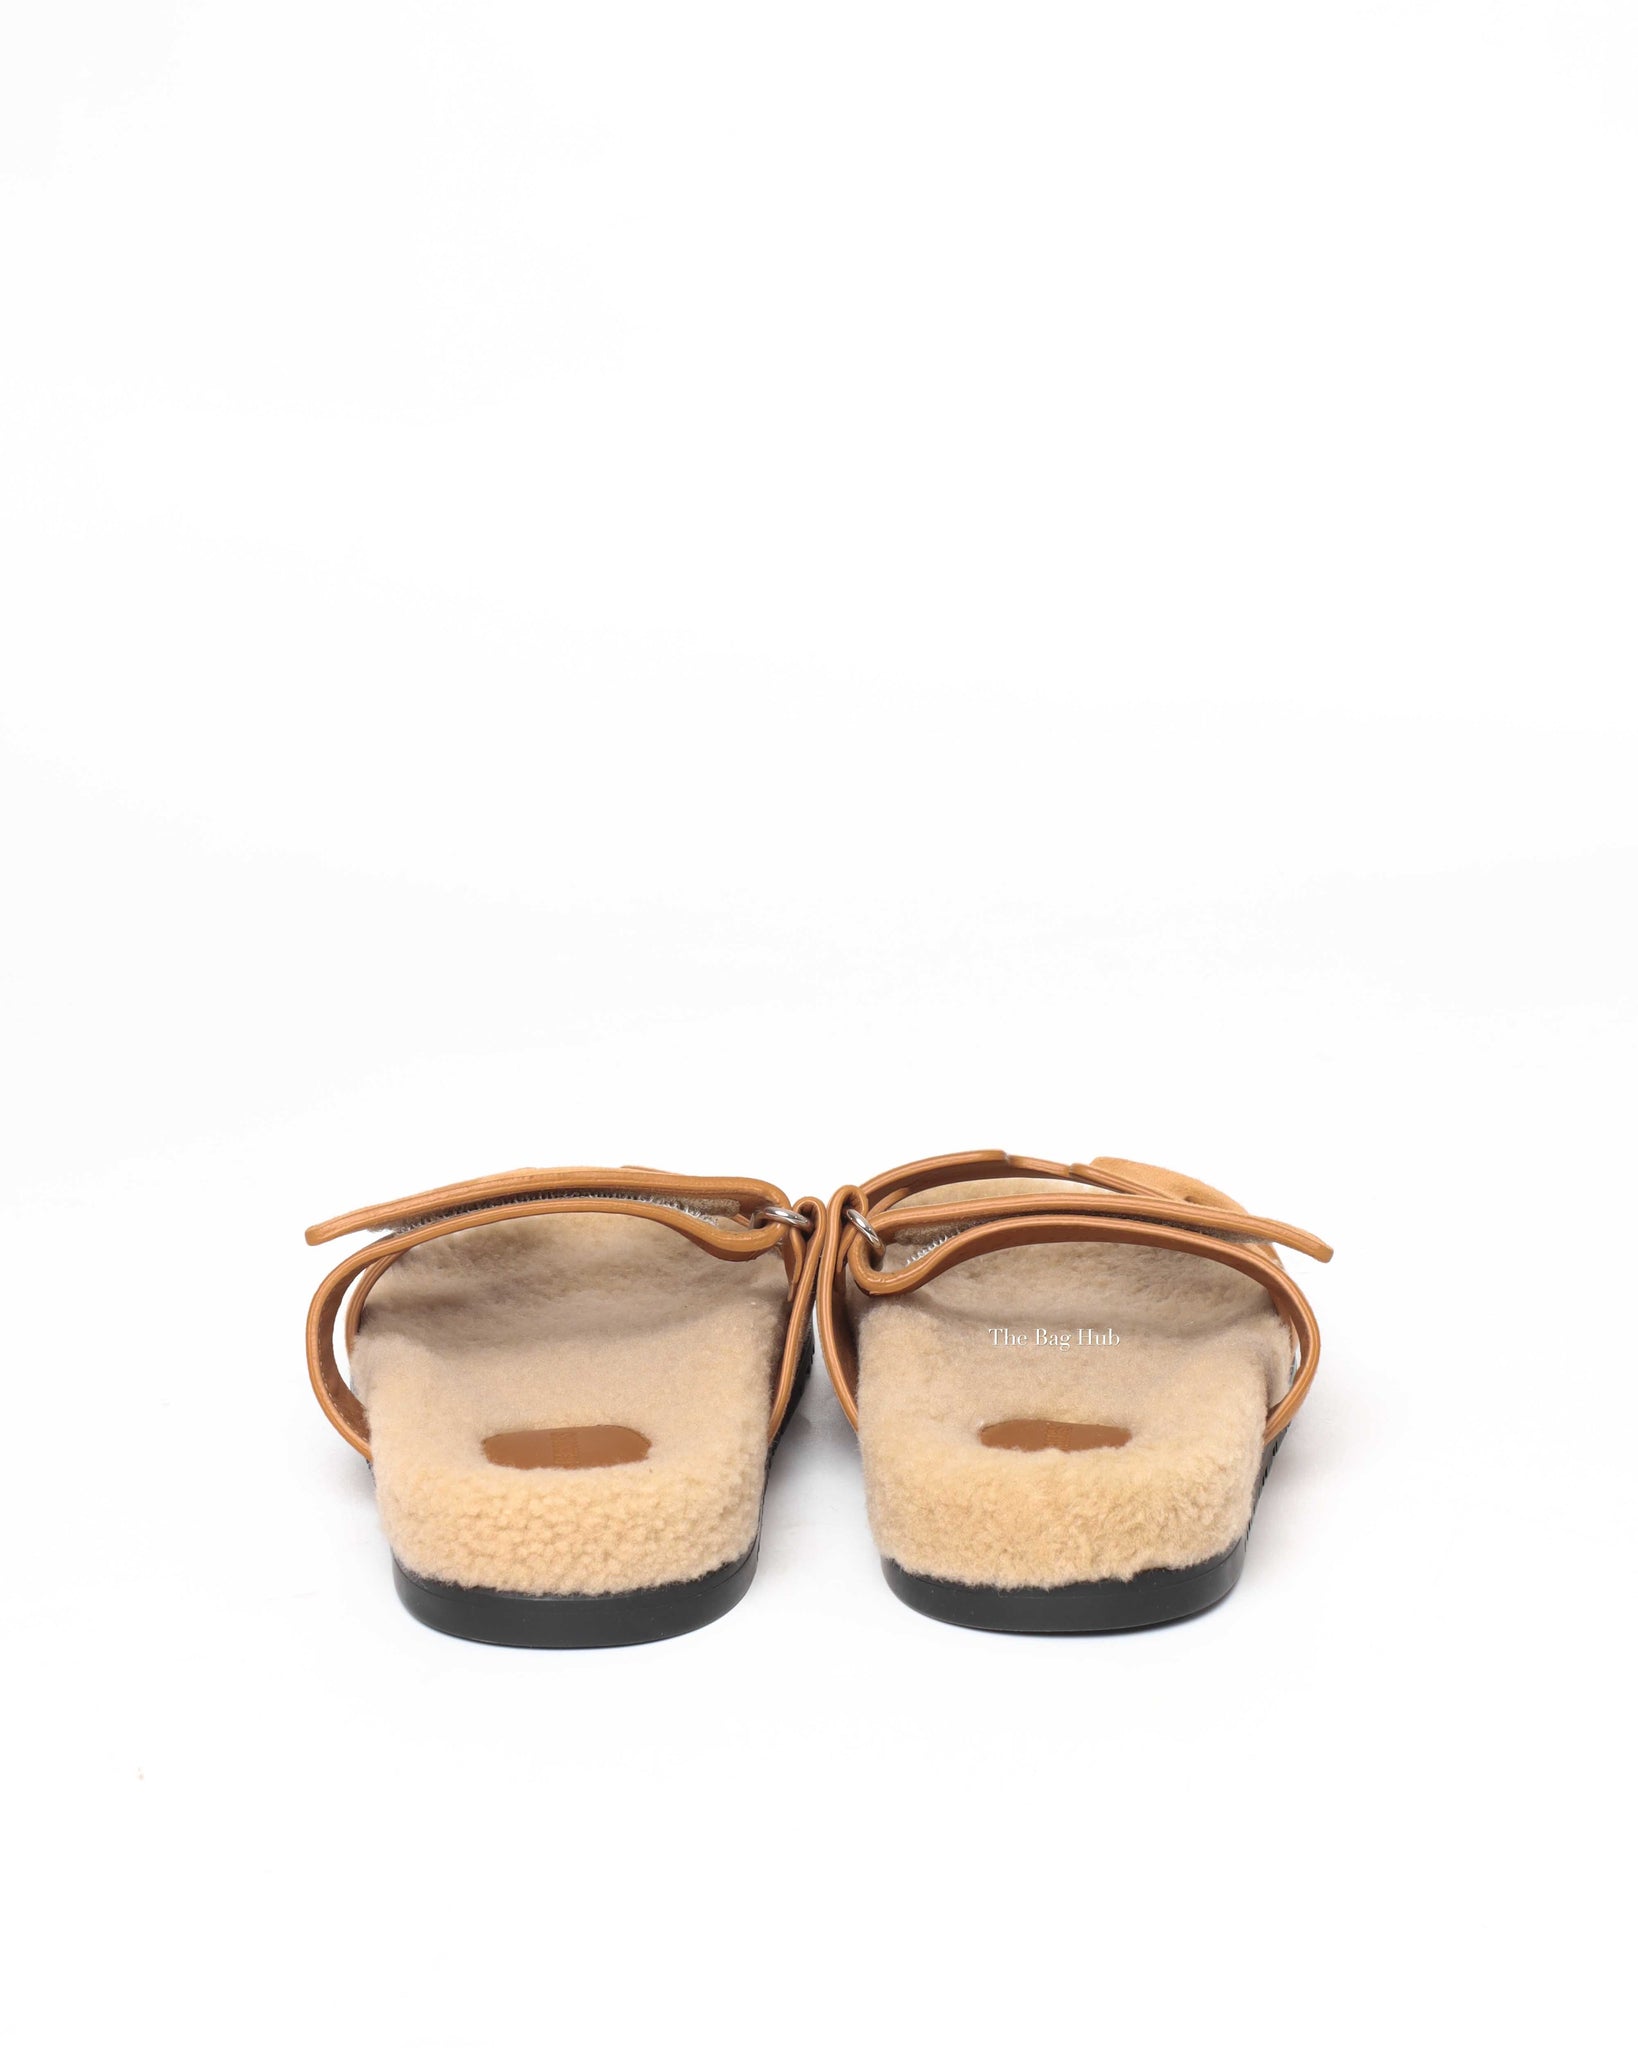 Hermes Light Tan Suede with Shearling Chypre Sandals Size 39